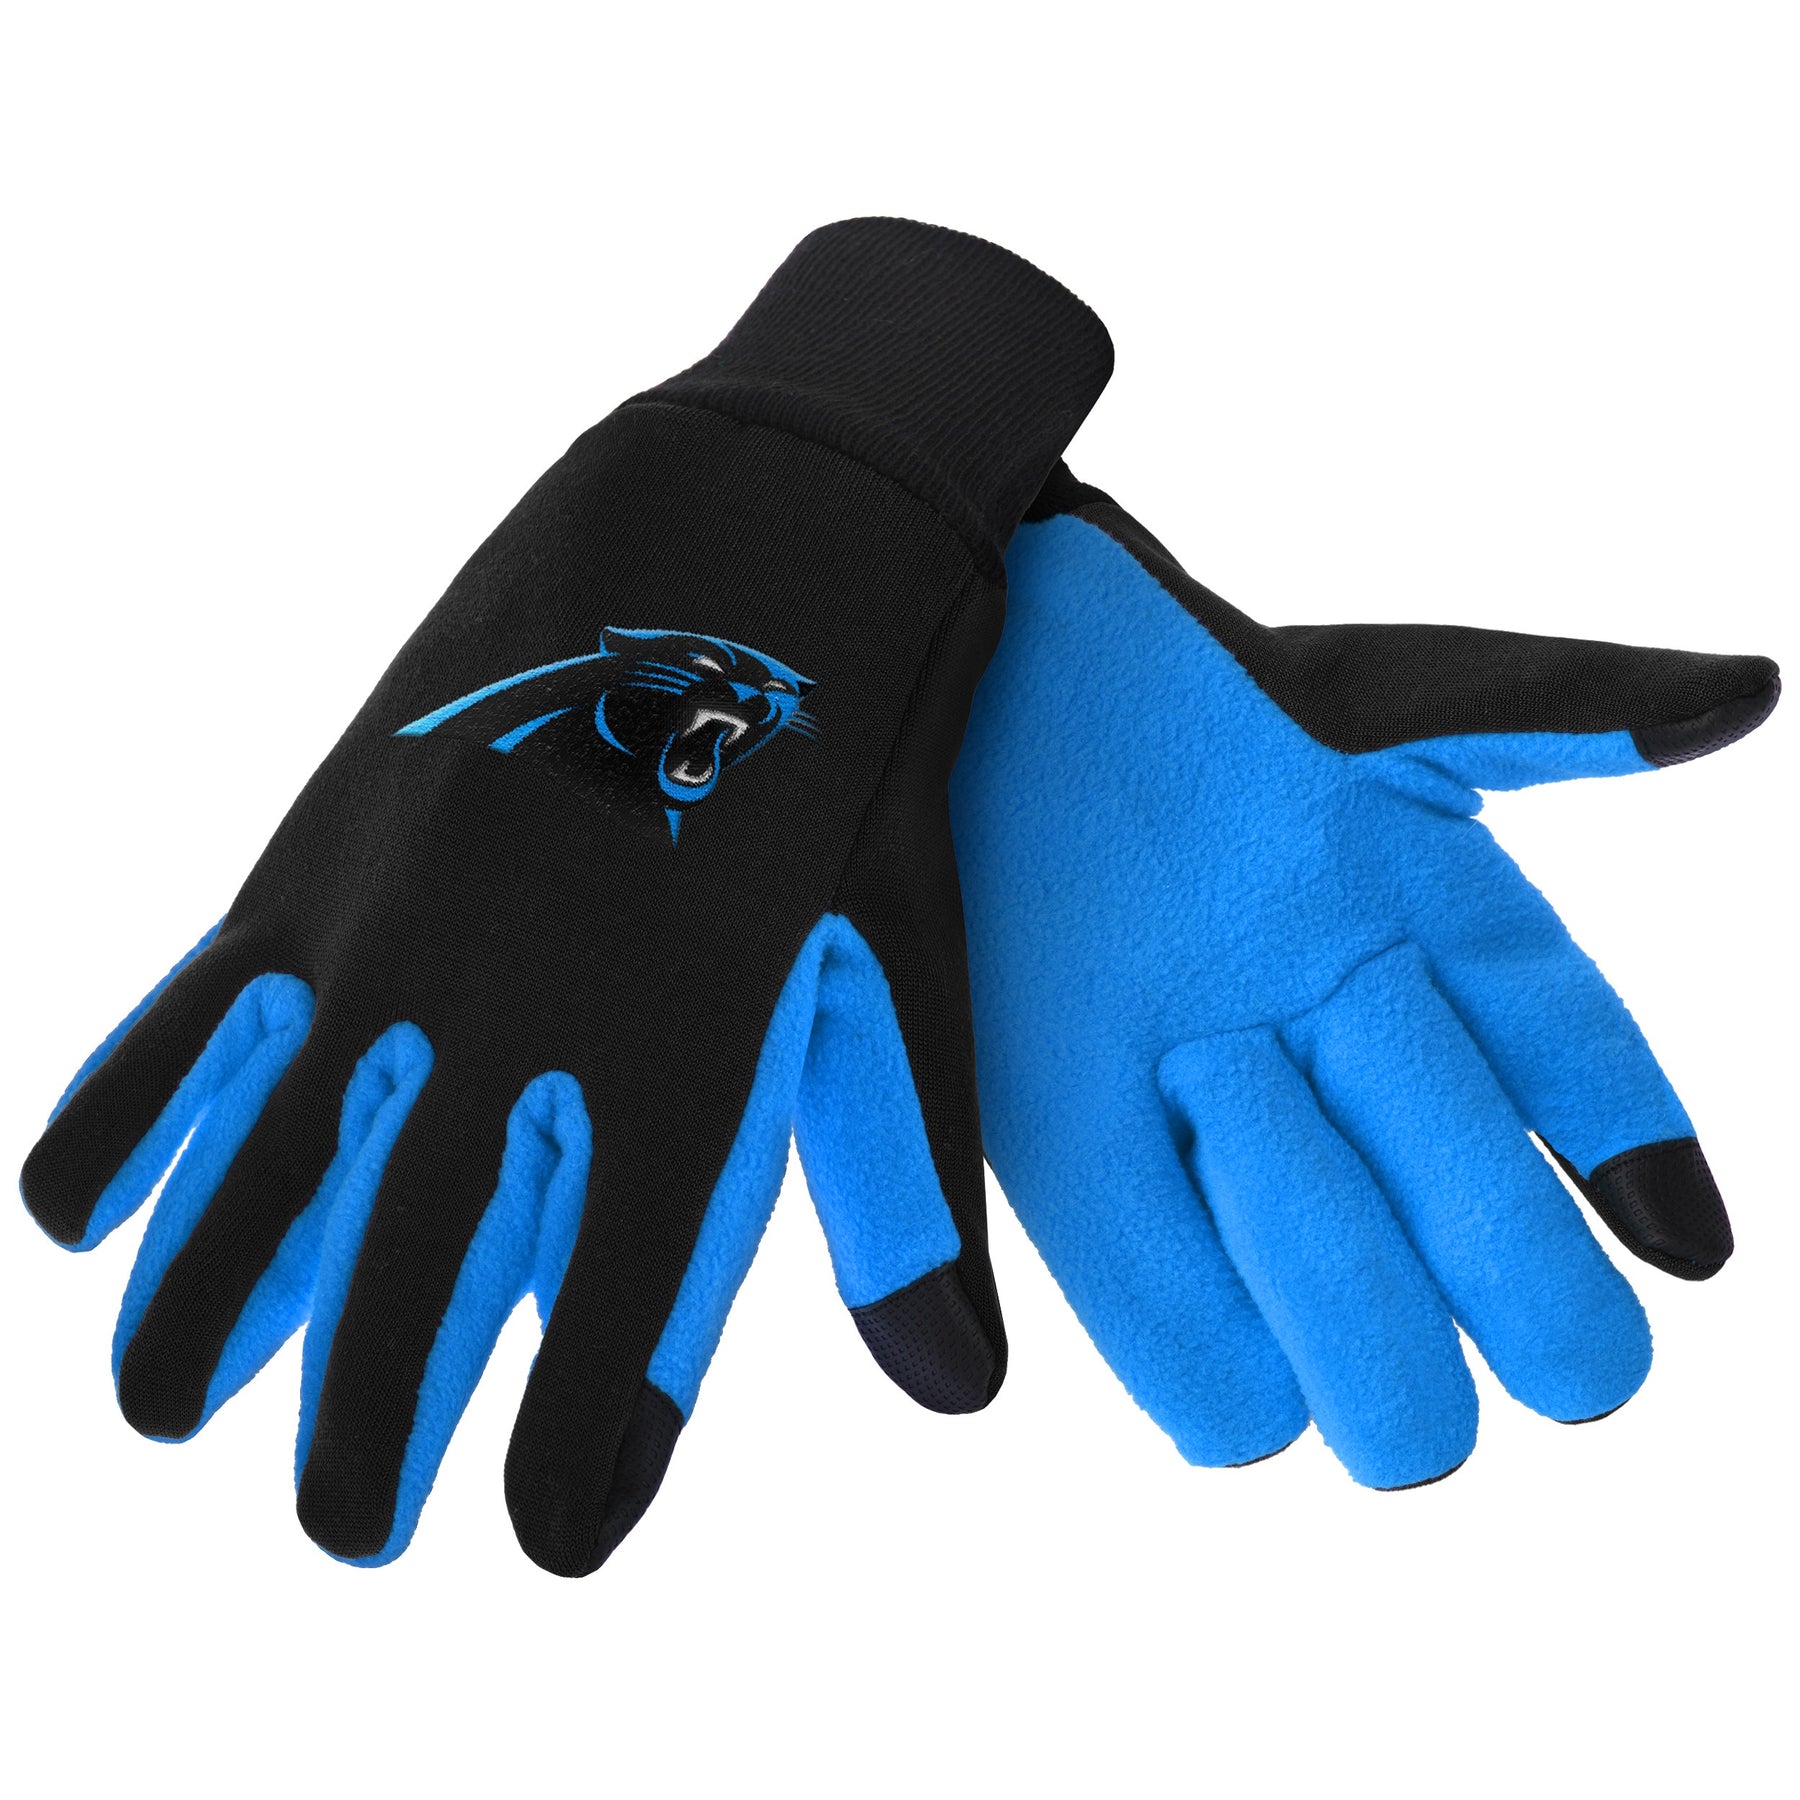 nfl panthers football gloves